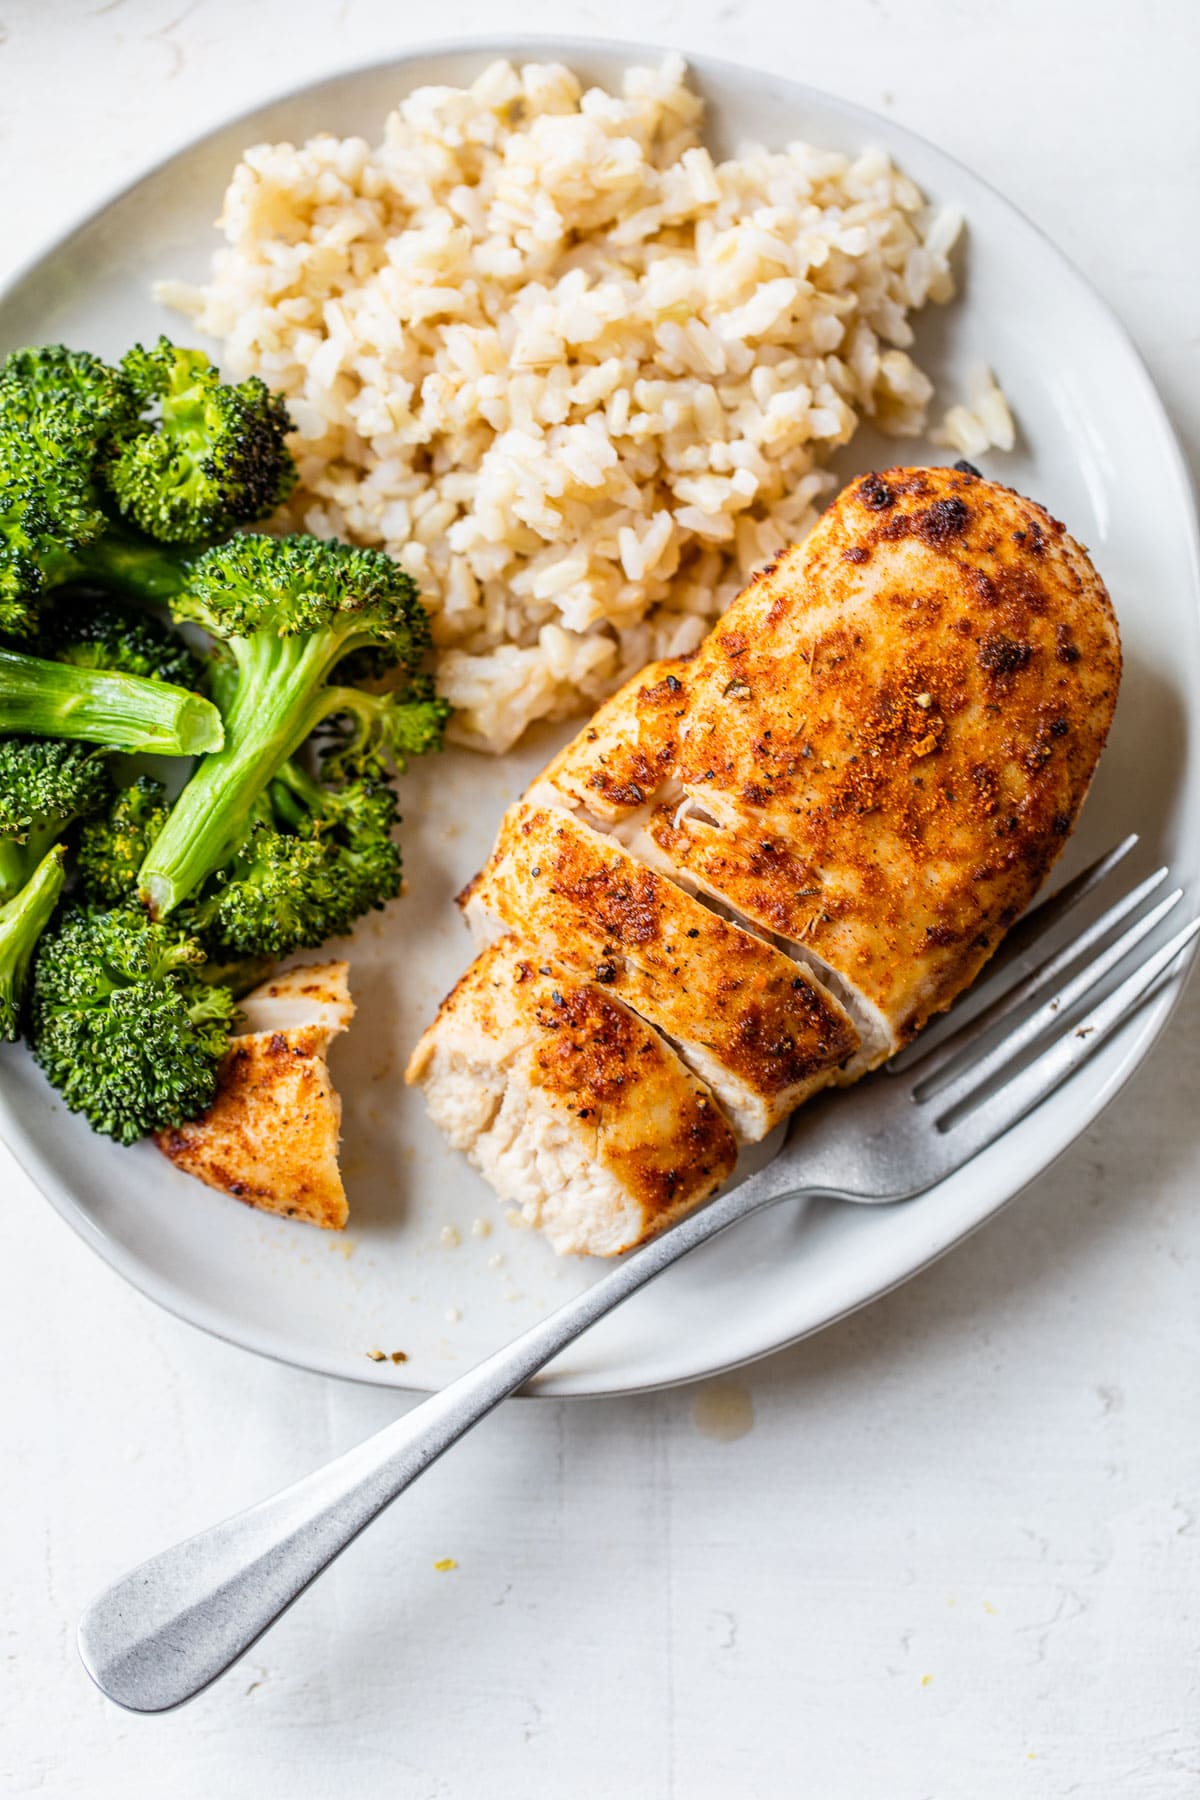 Air fryer chicken breast on a plate with broccoli and rice